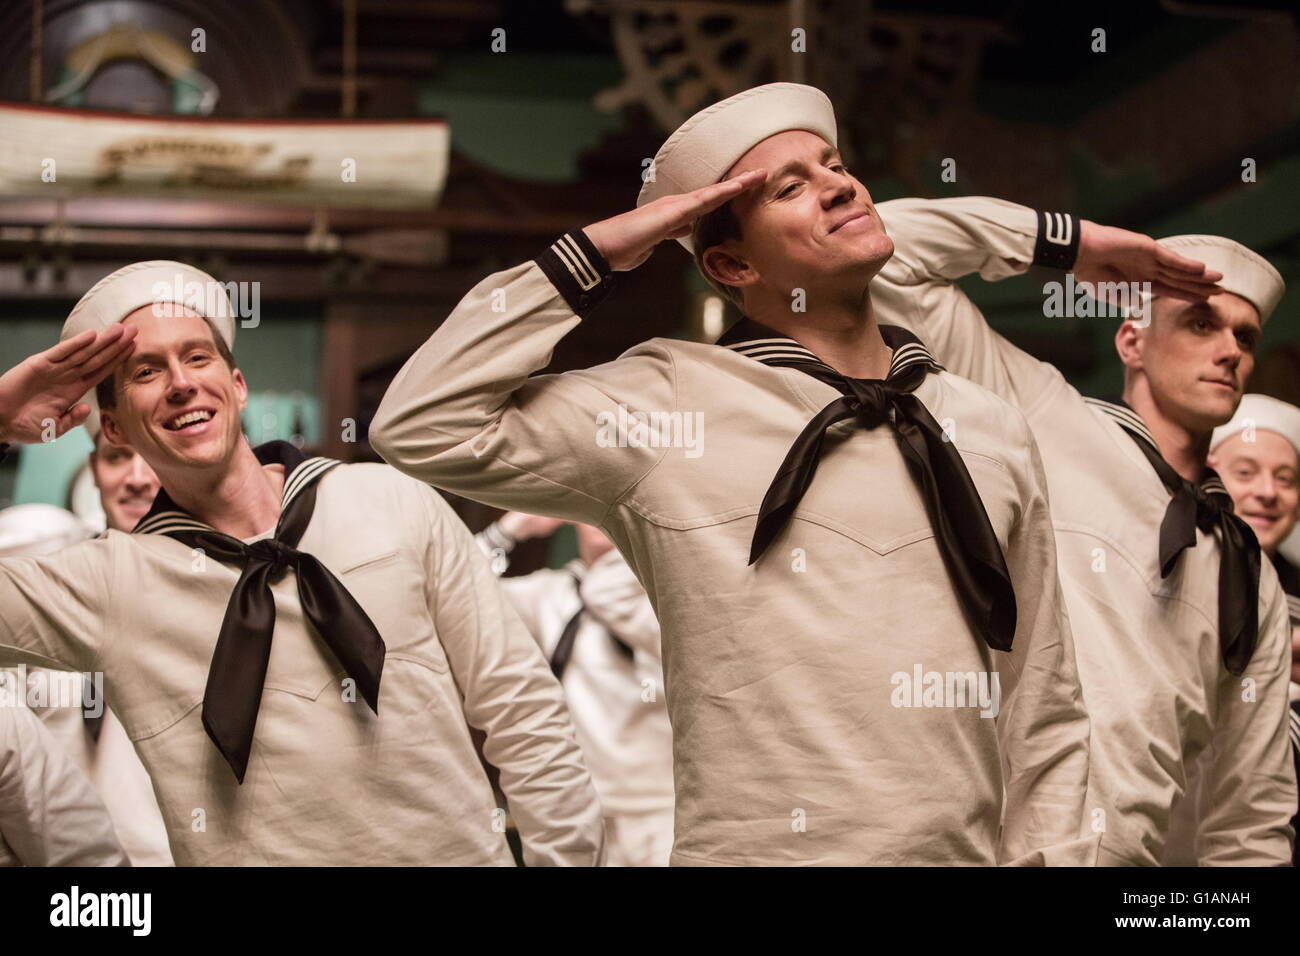 RELEASE DATE: February 5, 2016 TITLE: Hail, Caesar! STUDIO: Universal Pictures DIRECTOR: Ethan Coen, Joel Coen PLOT: A Hollywood fixer in the 1950s works to keep the studio's stars in line PICTURED: Channing Tatum (Credit: c Universal Pictures/Entertainment Pictures/) Stock Photo